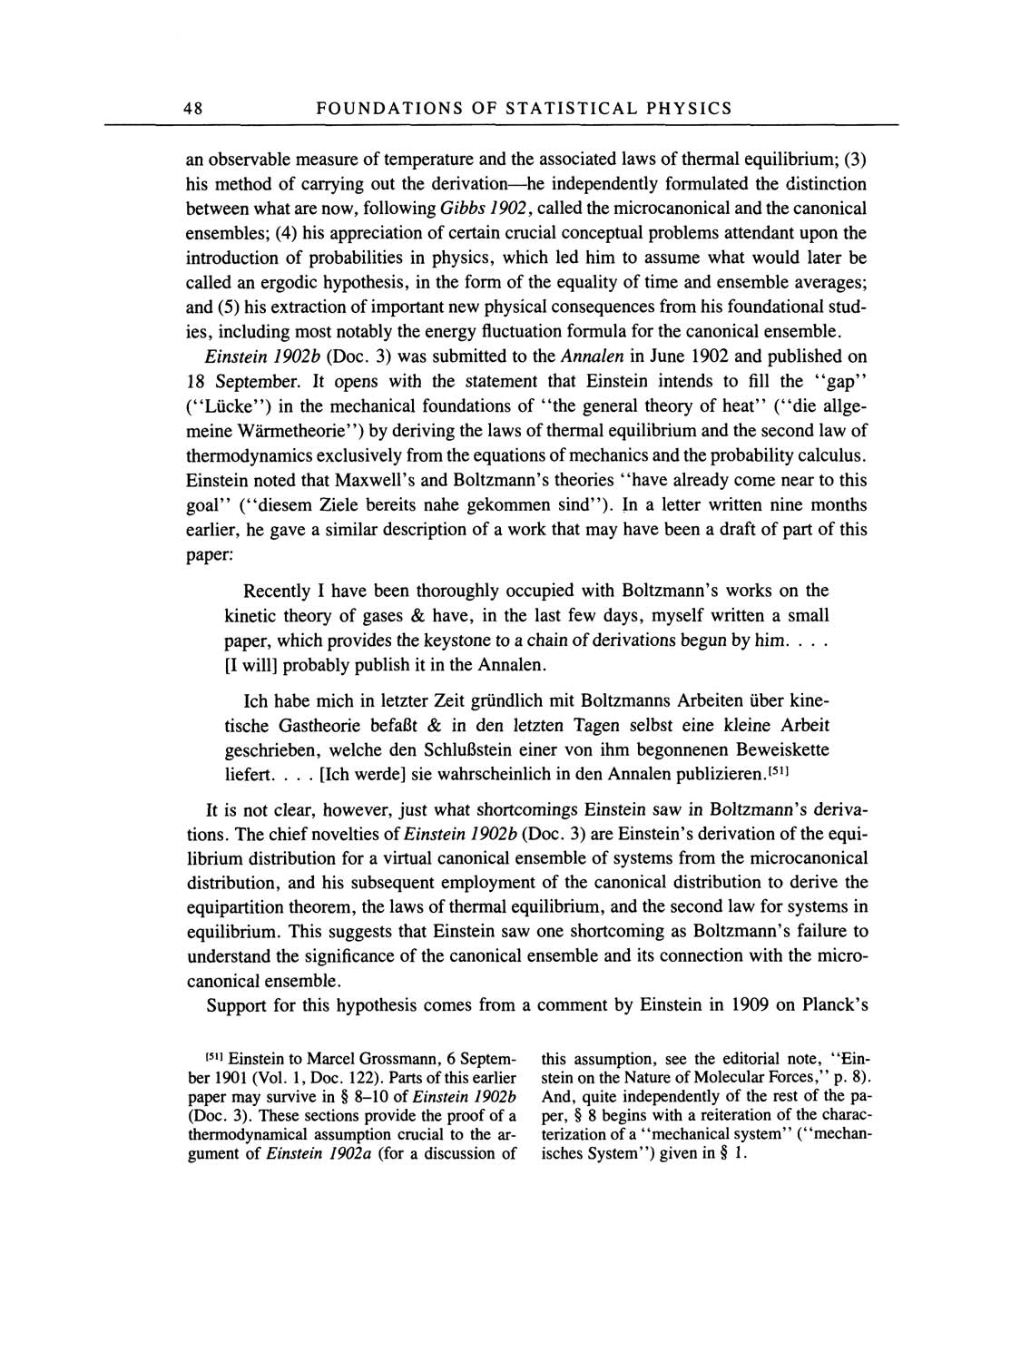 Volume 2: The Swiss Years: Writings, 1900-1909 page 48